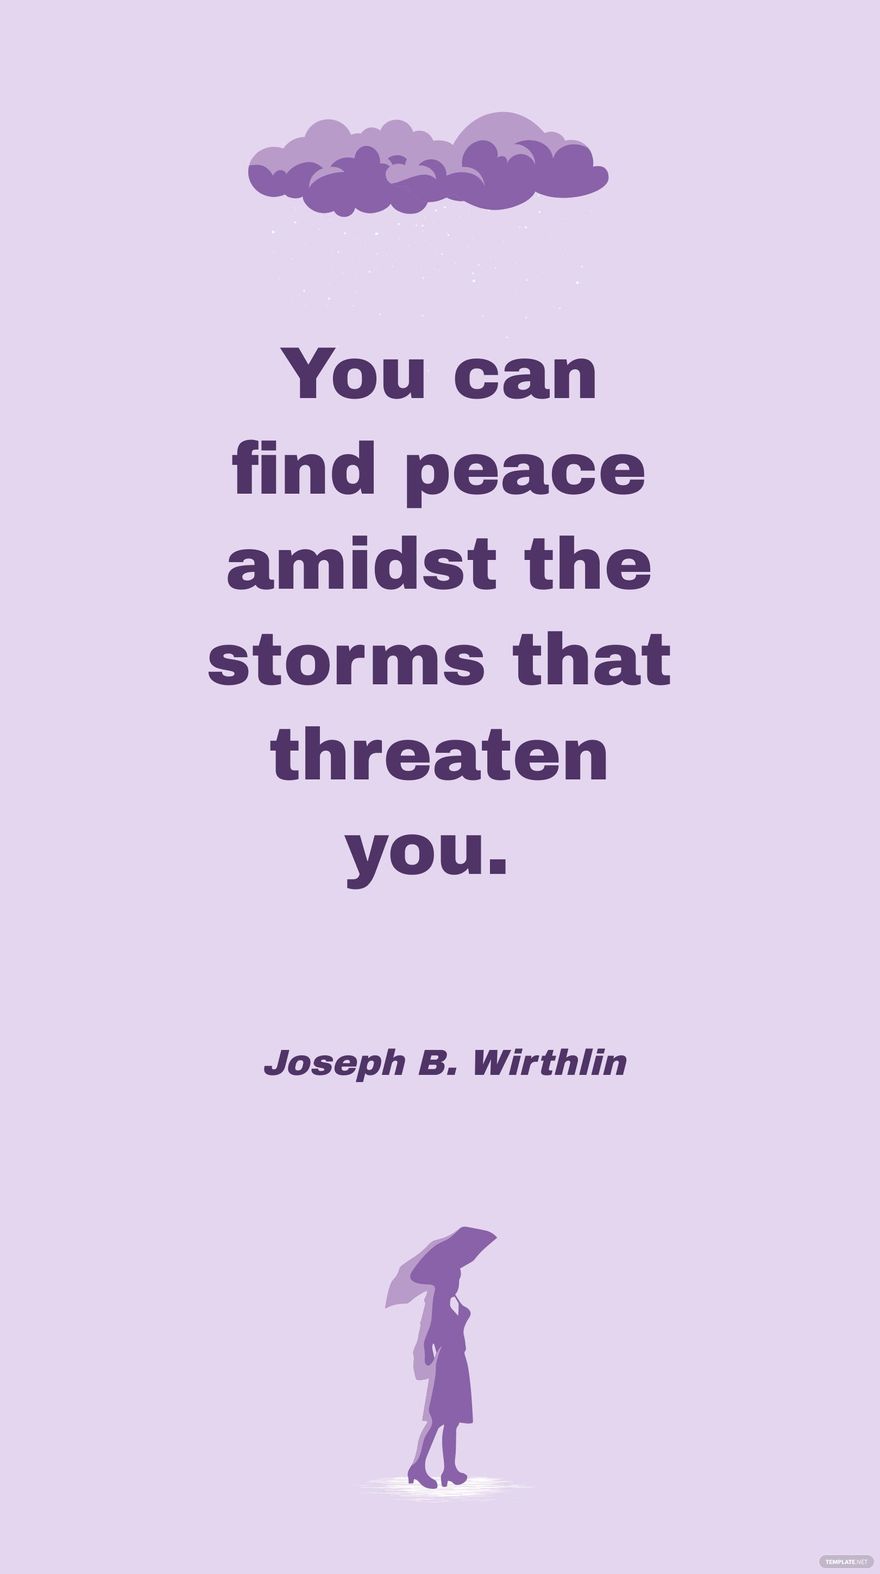 Joseph B. Wirthlin - You can find peace amidst the storms that threaten you.